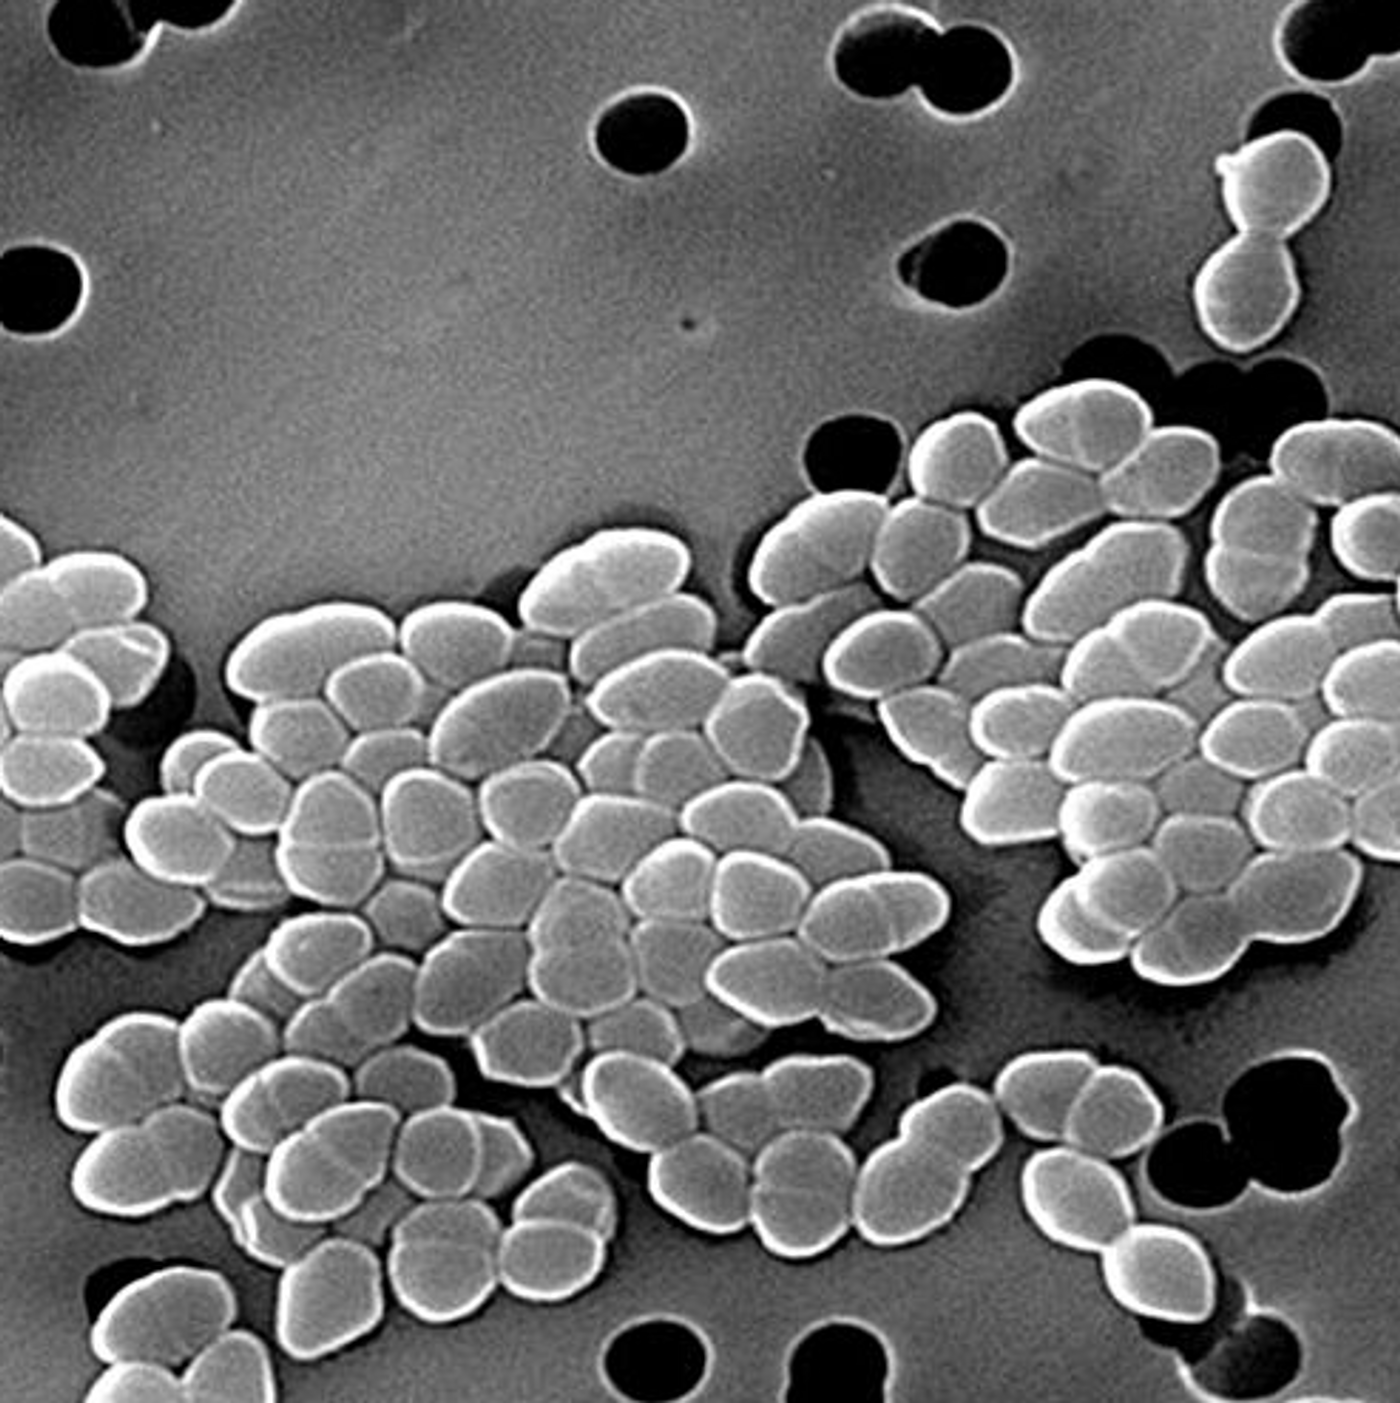 Scanning Electron Micrograph of Vancomycin Resistant Enterococci / Credit: Centers for Disease Control and Prevention's Public Health Image Library